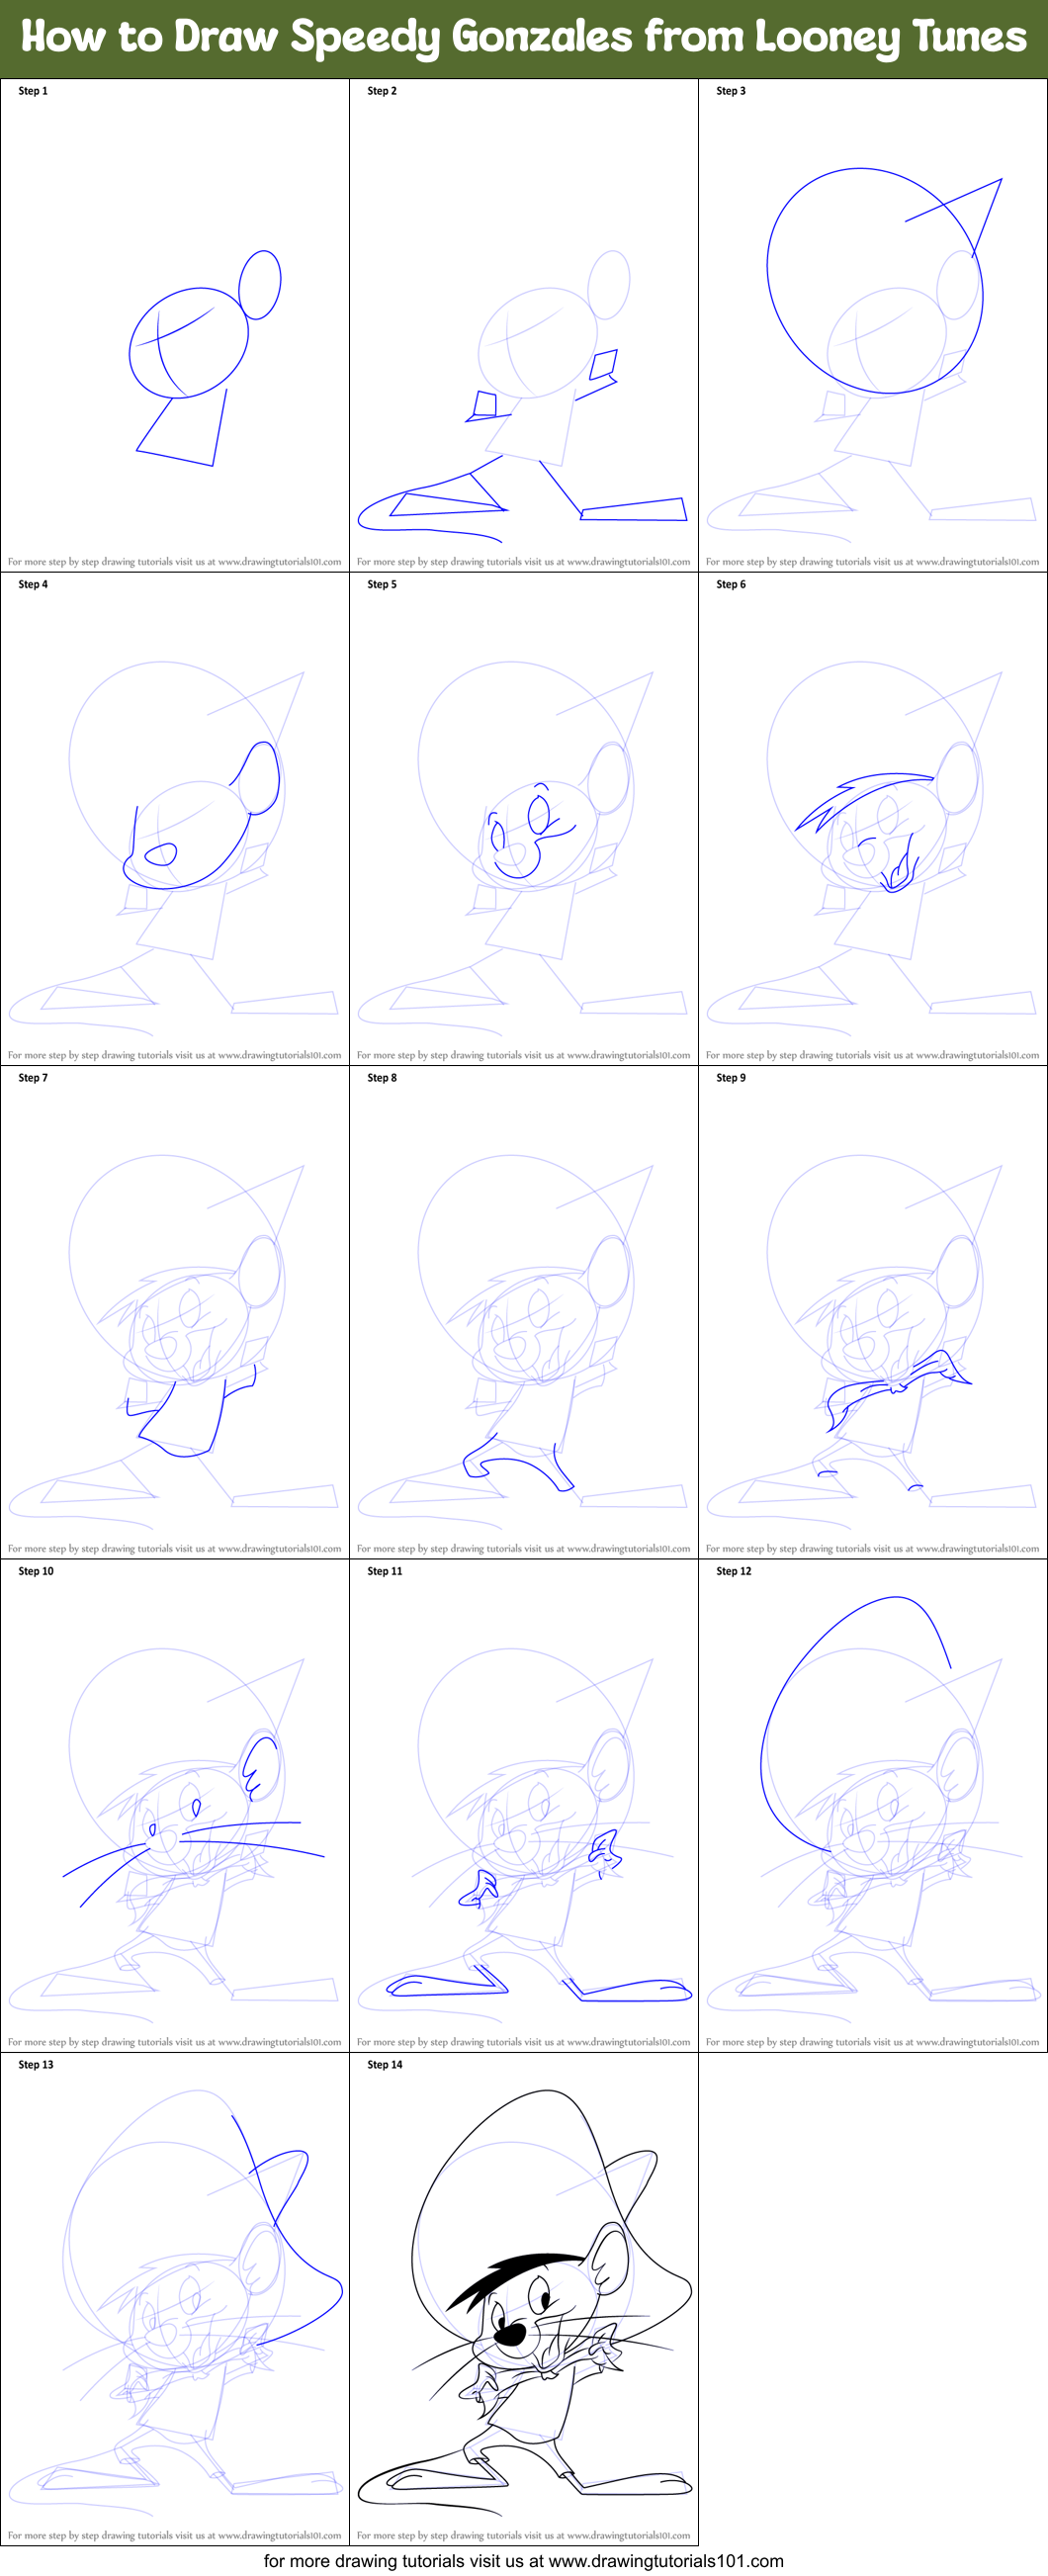 How to Draw Speedy Gonzales from Looney Tunes printable step by step